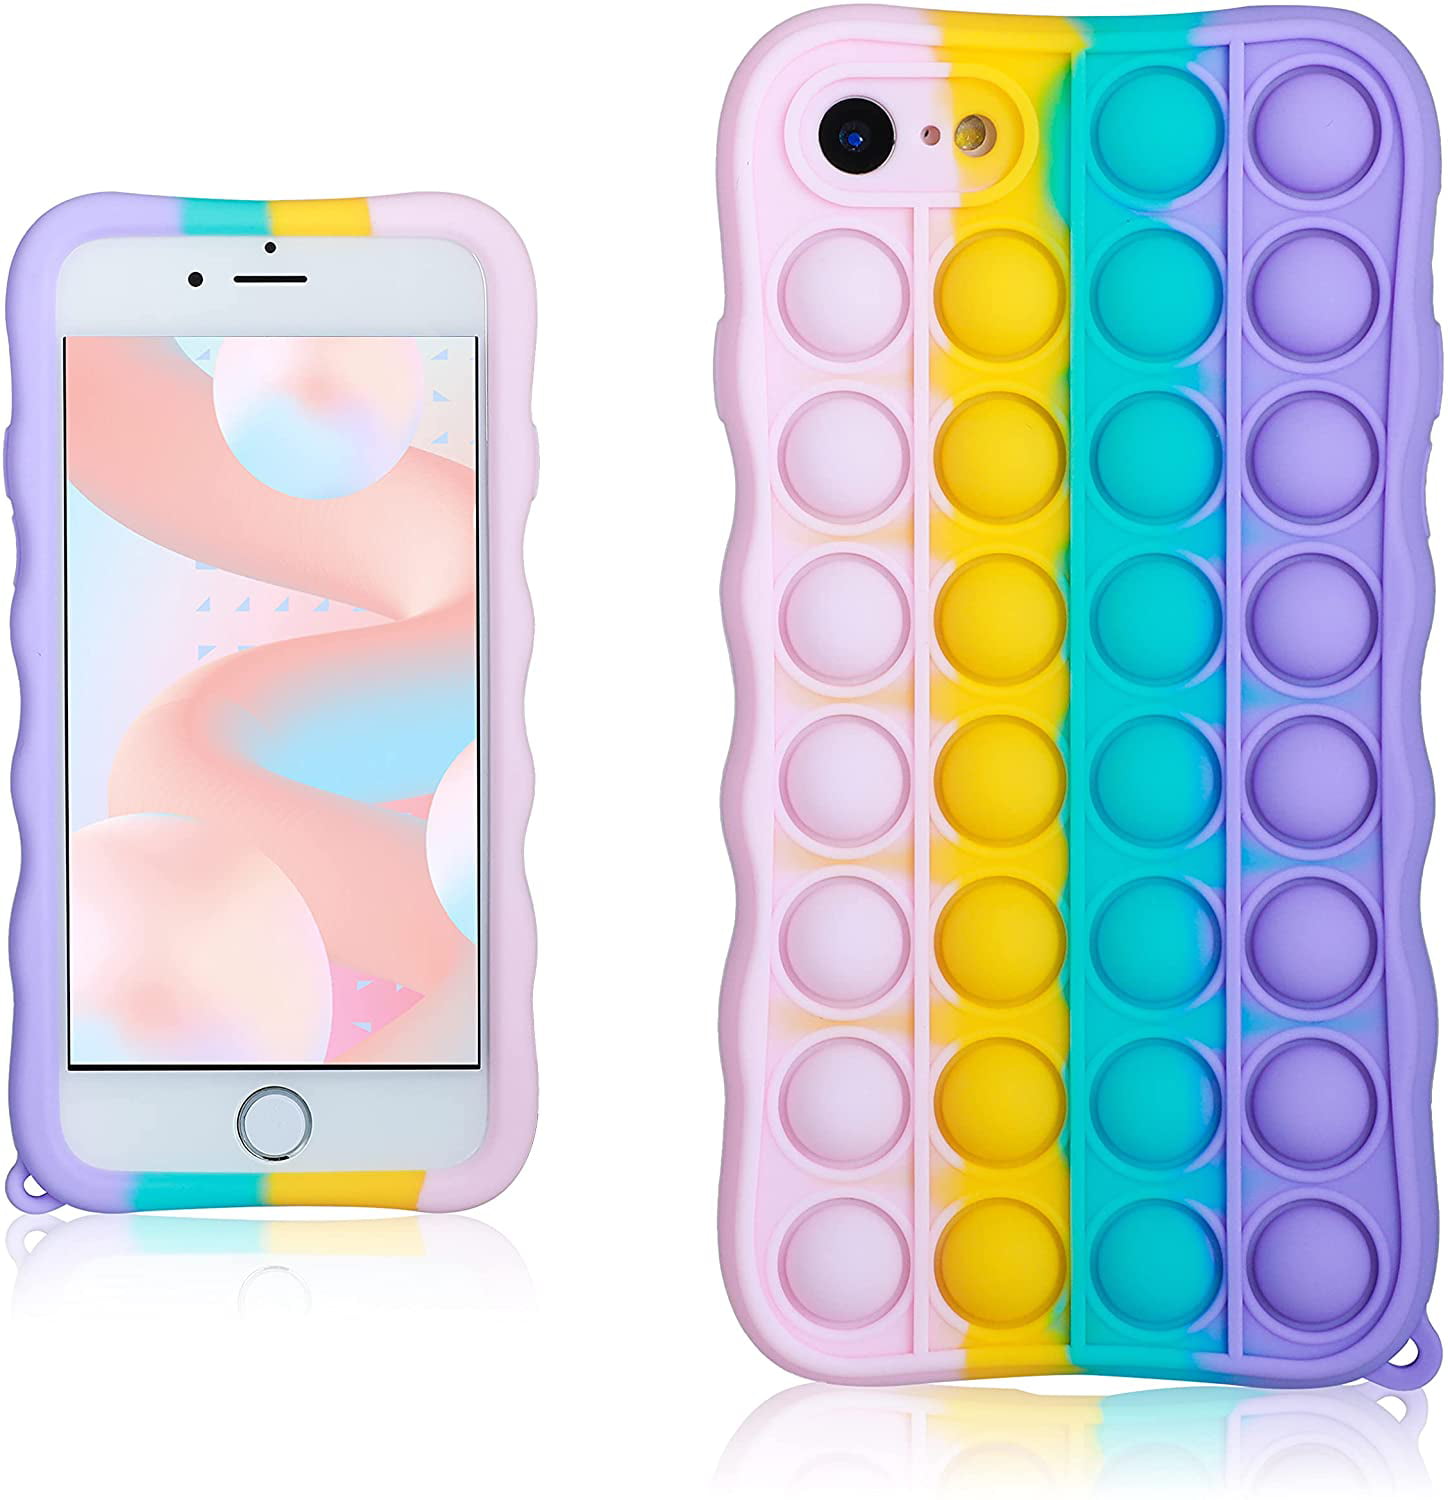 JUSTICE Girls iPhone 6/6s Case Smart Phone Hamburger Silicone NEW 